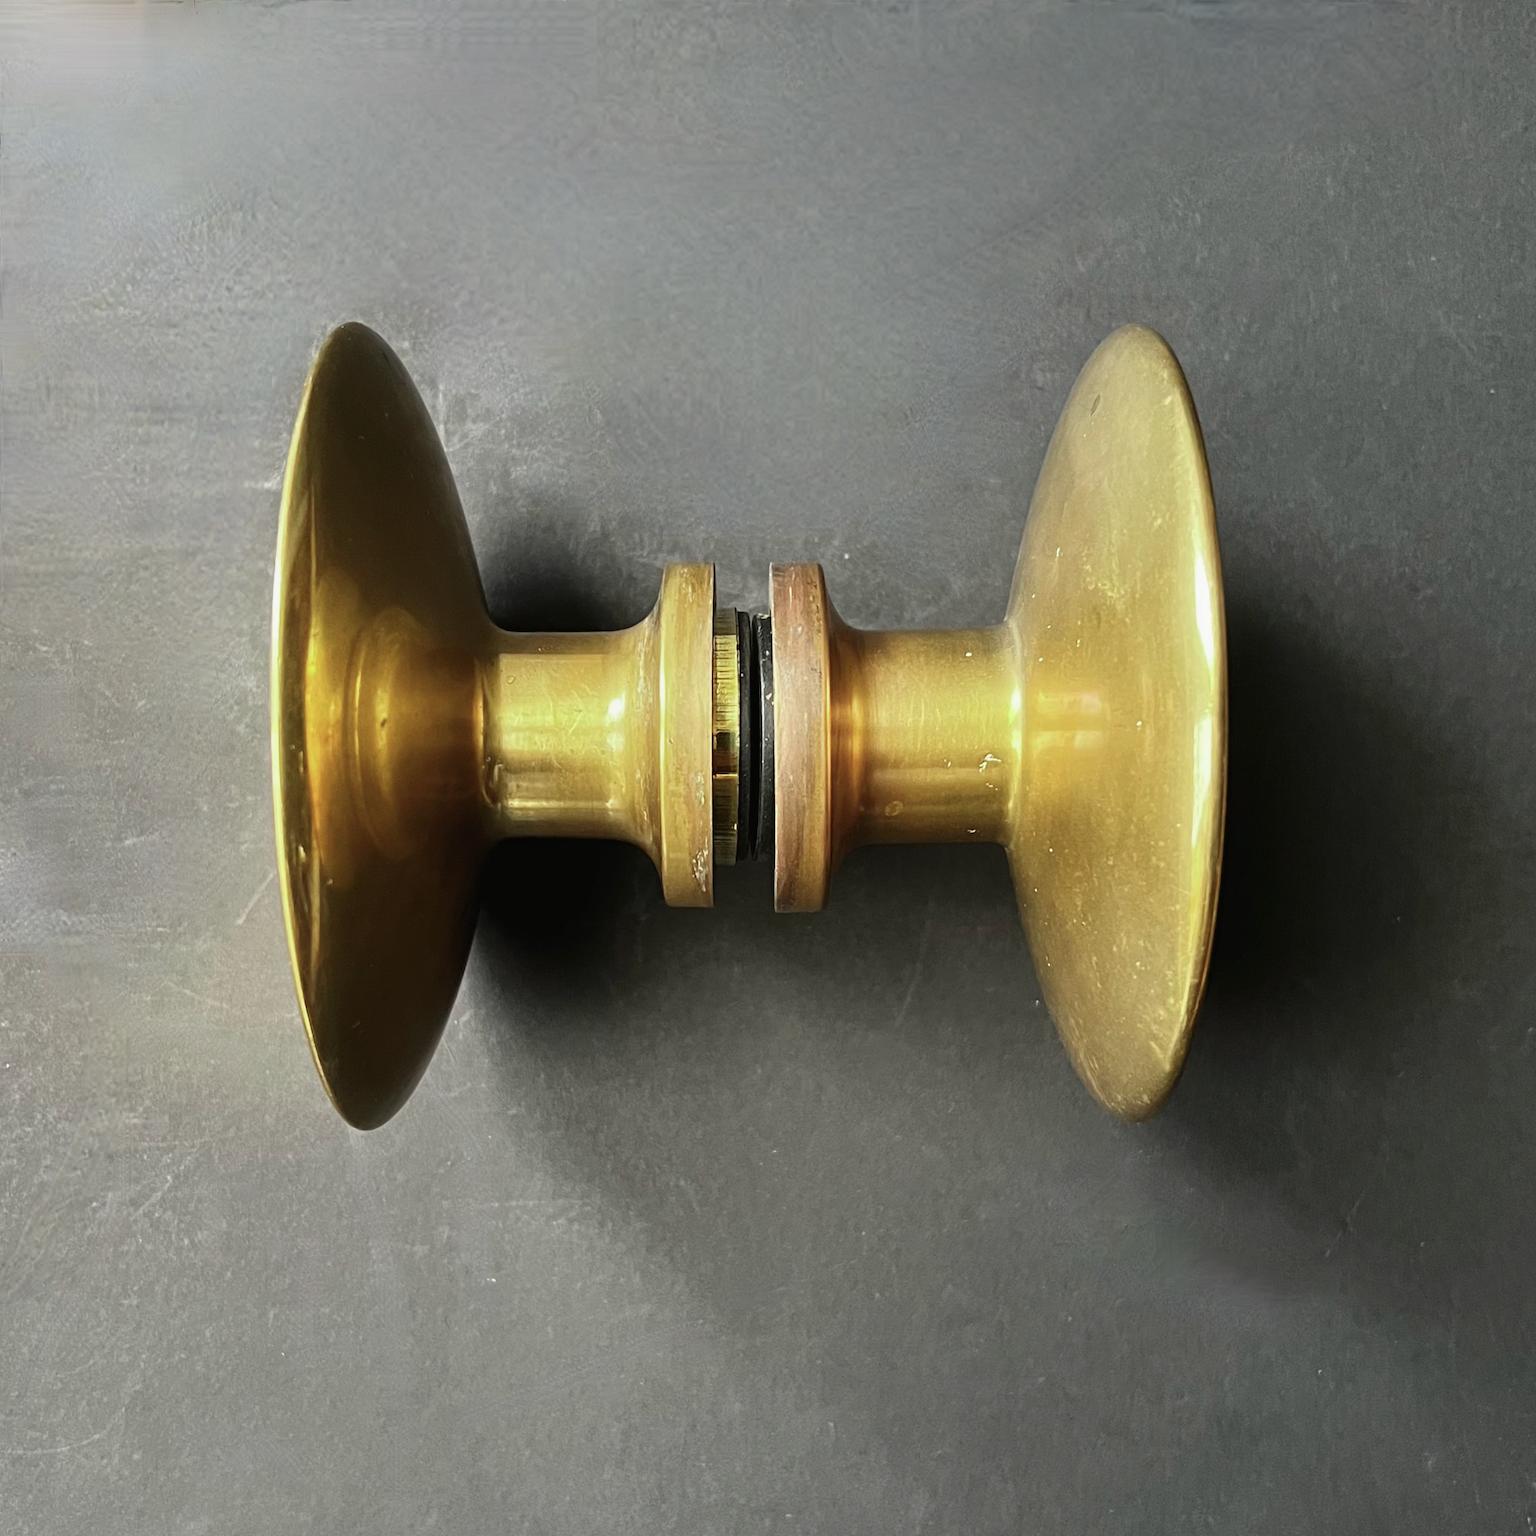 Mid-Century Modern Circular Push-and-Pull Door Handle in Bronze, Mid-20th Century, France [I] For Sale